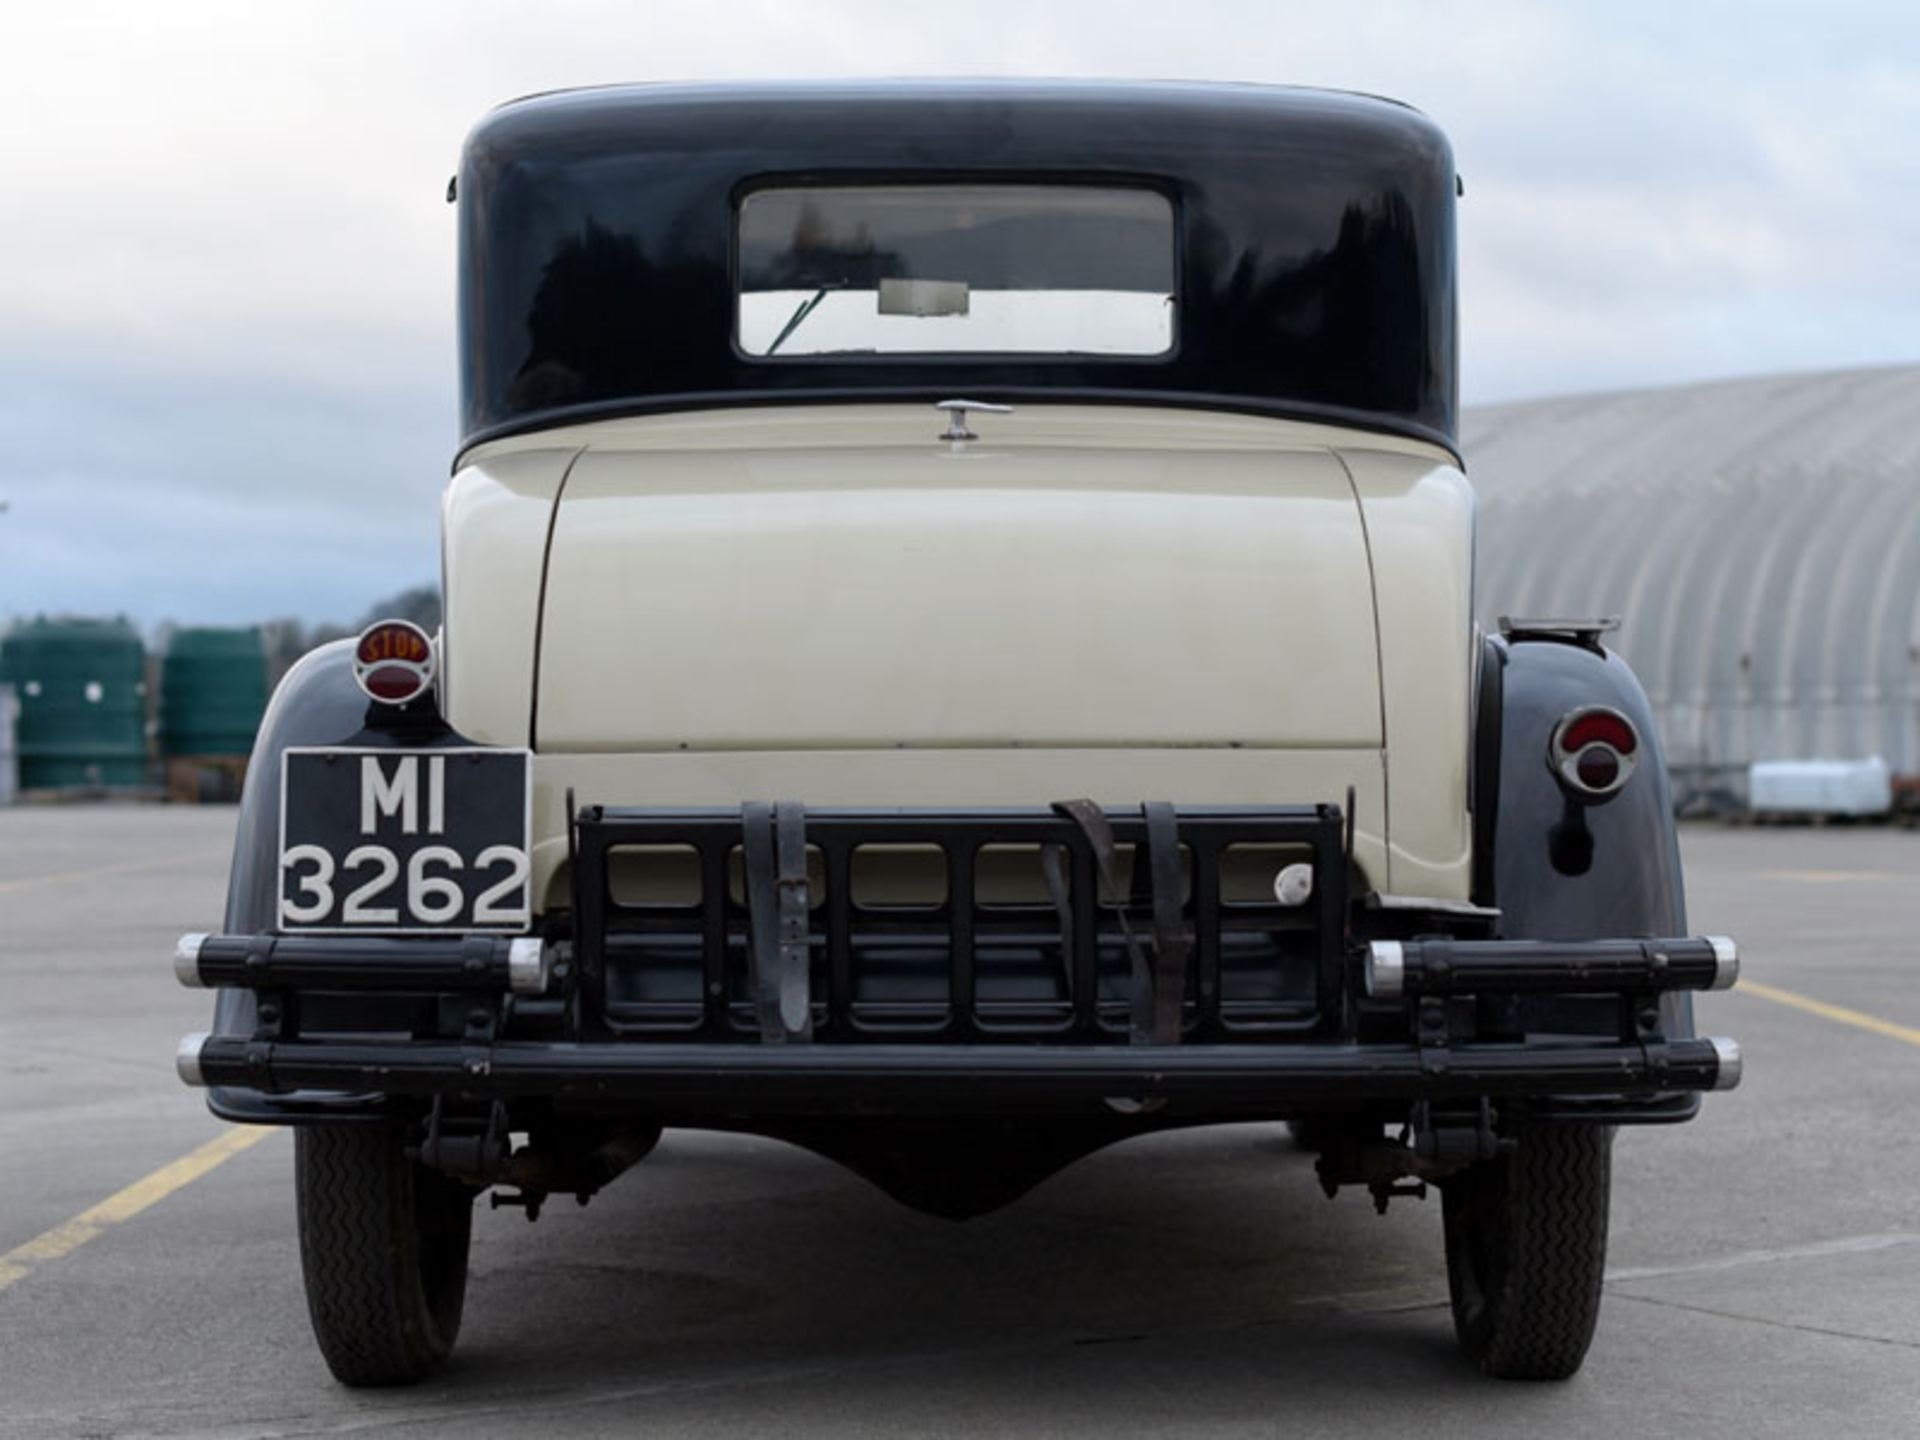 1931 Willys Overland Whippet 96A Coupe - Image 5 of 8